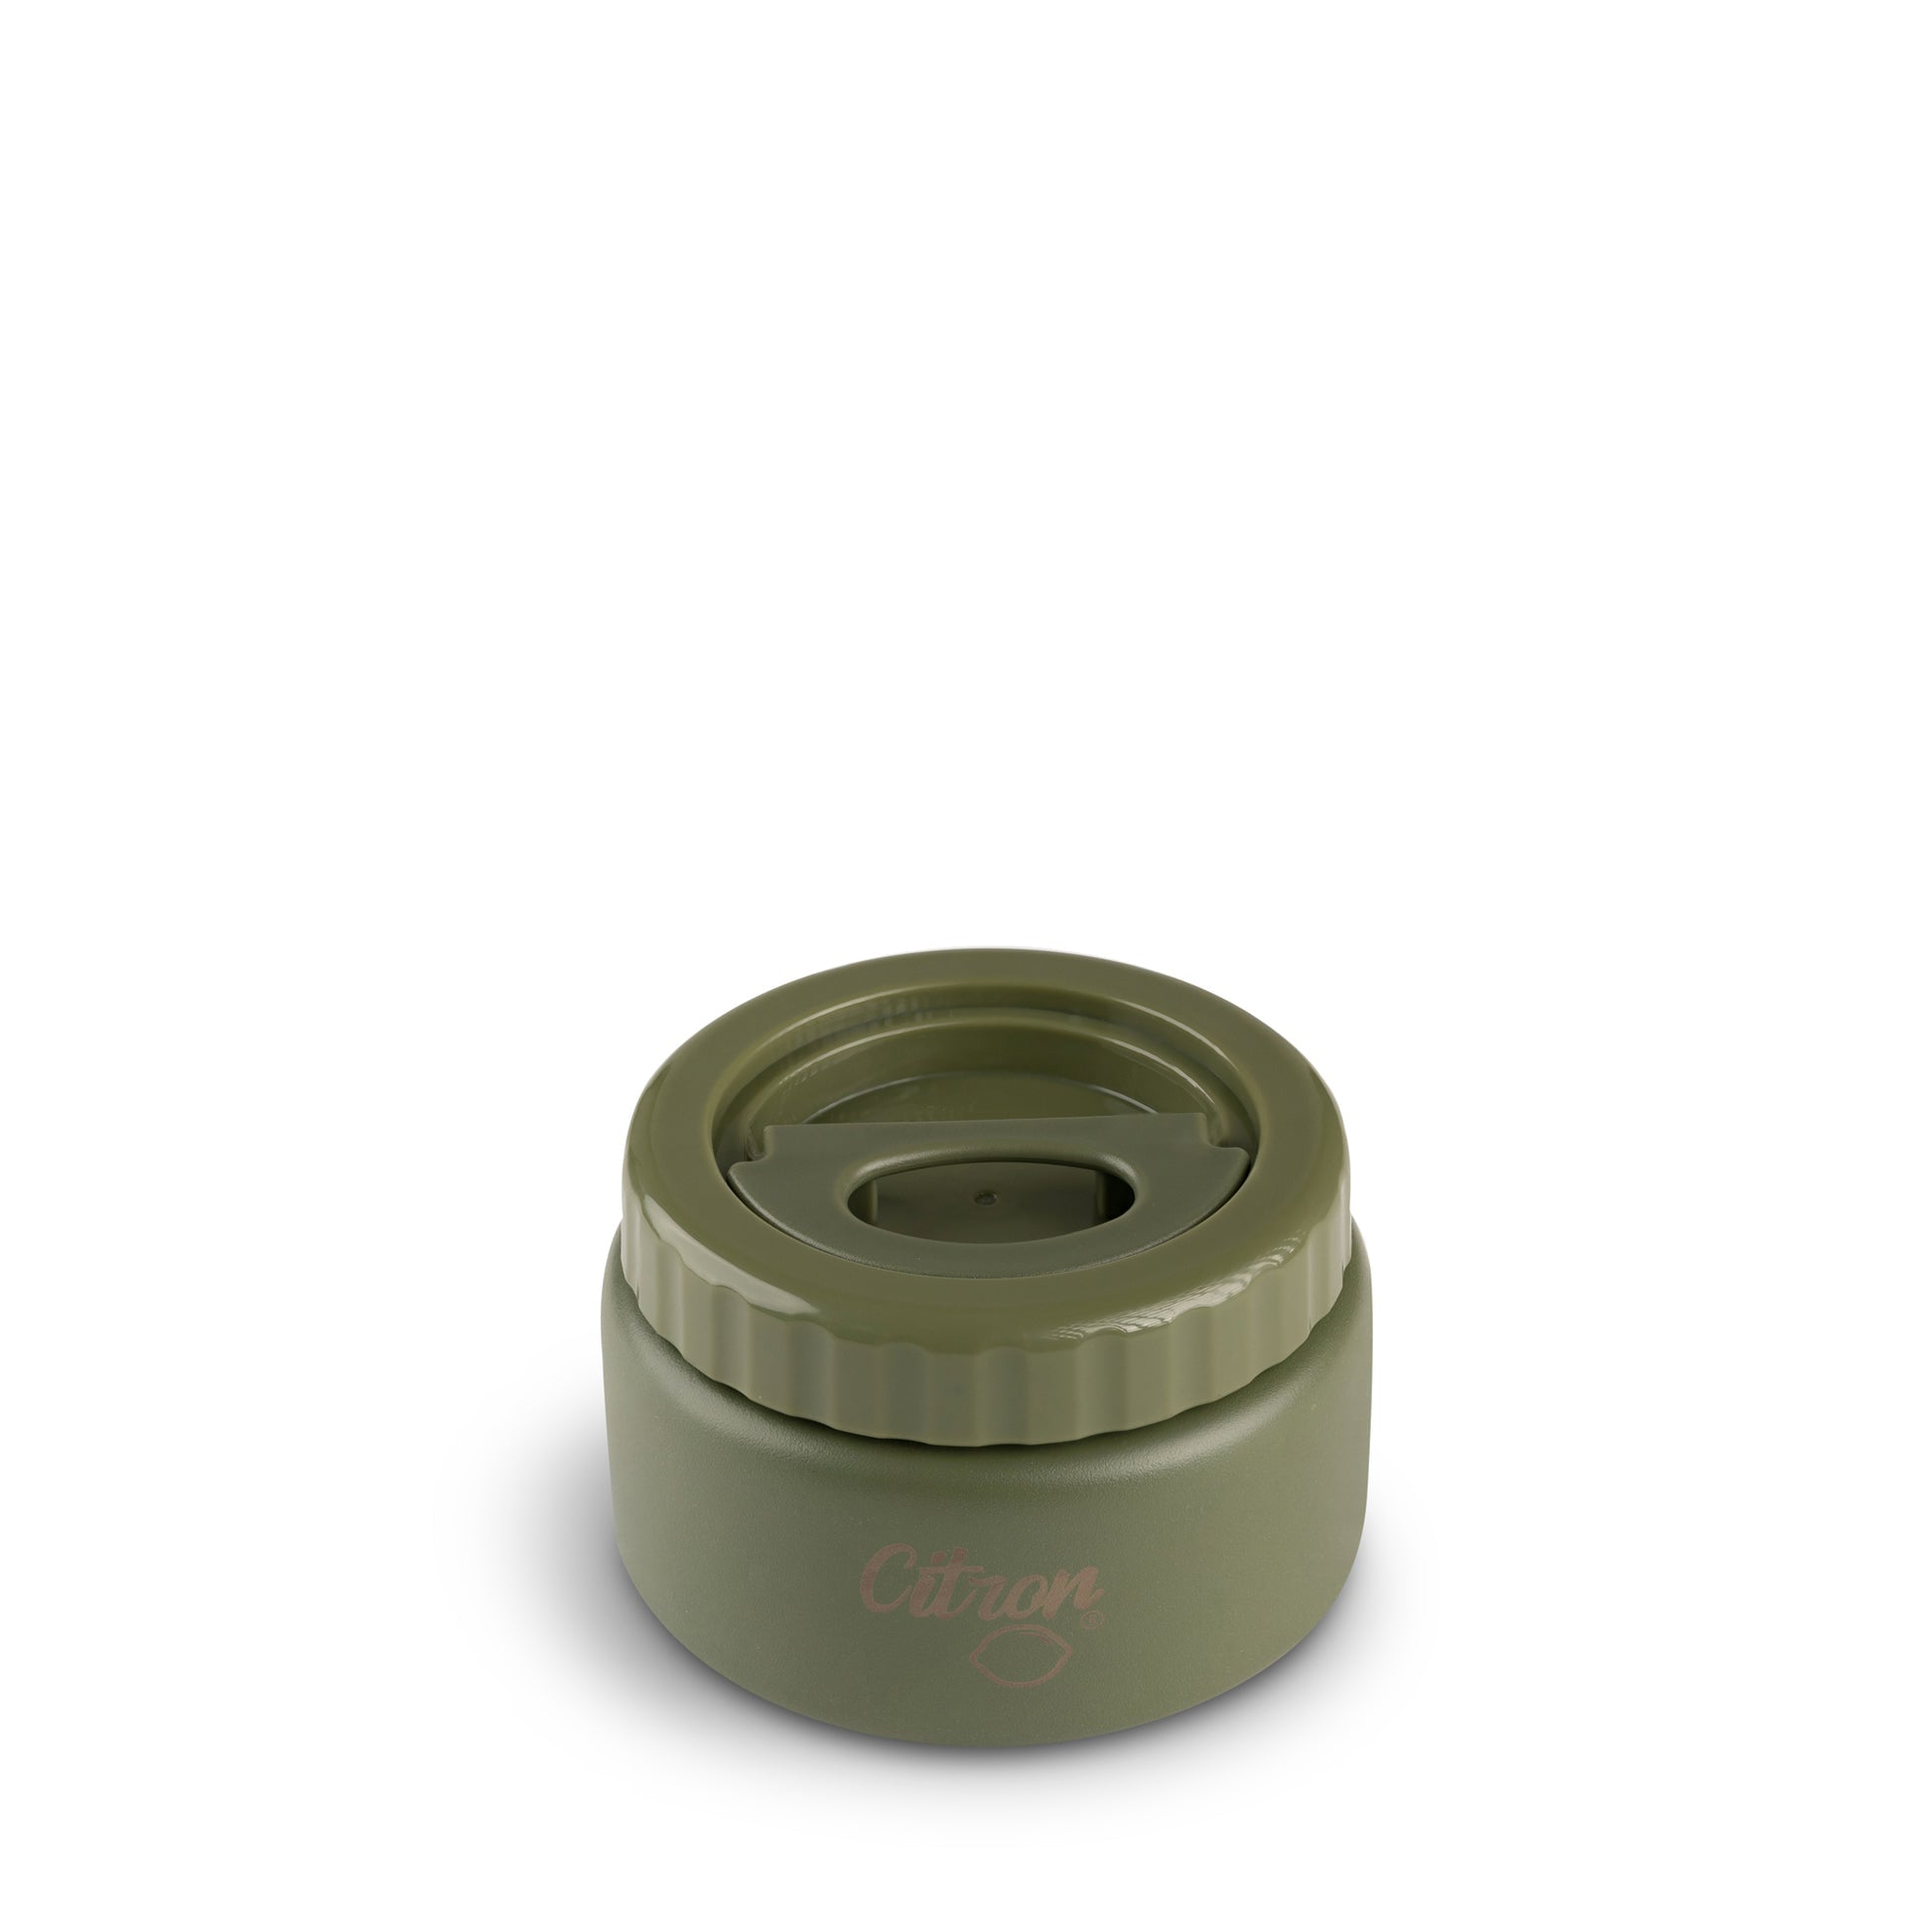 citron-food-jar-insulated-stainless-steel-250ml-olive-green-citr-96410- (2)